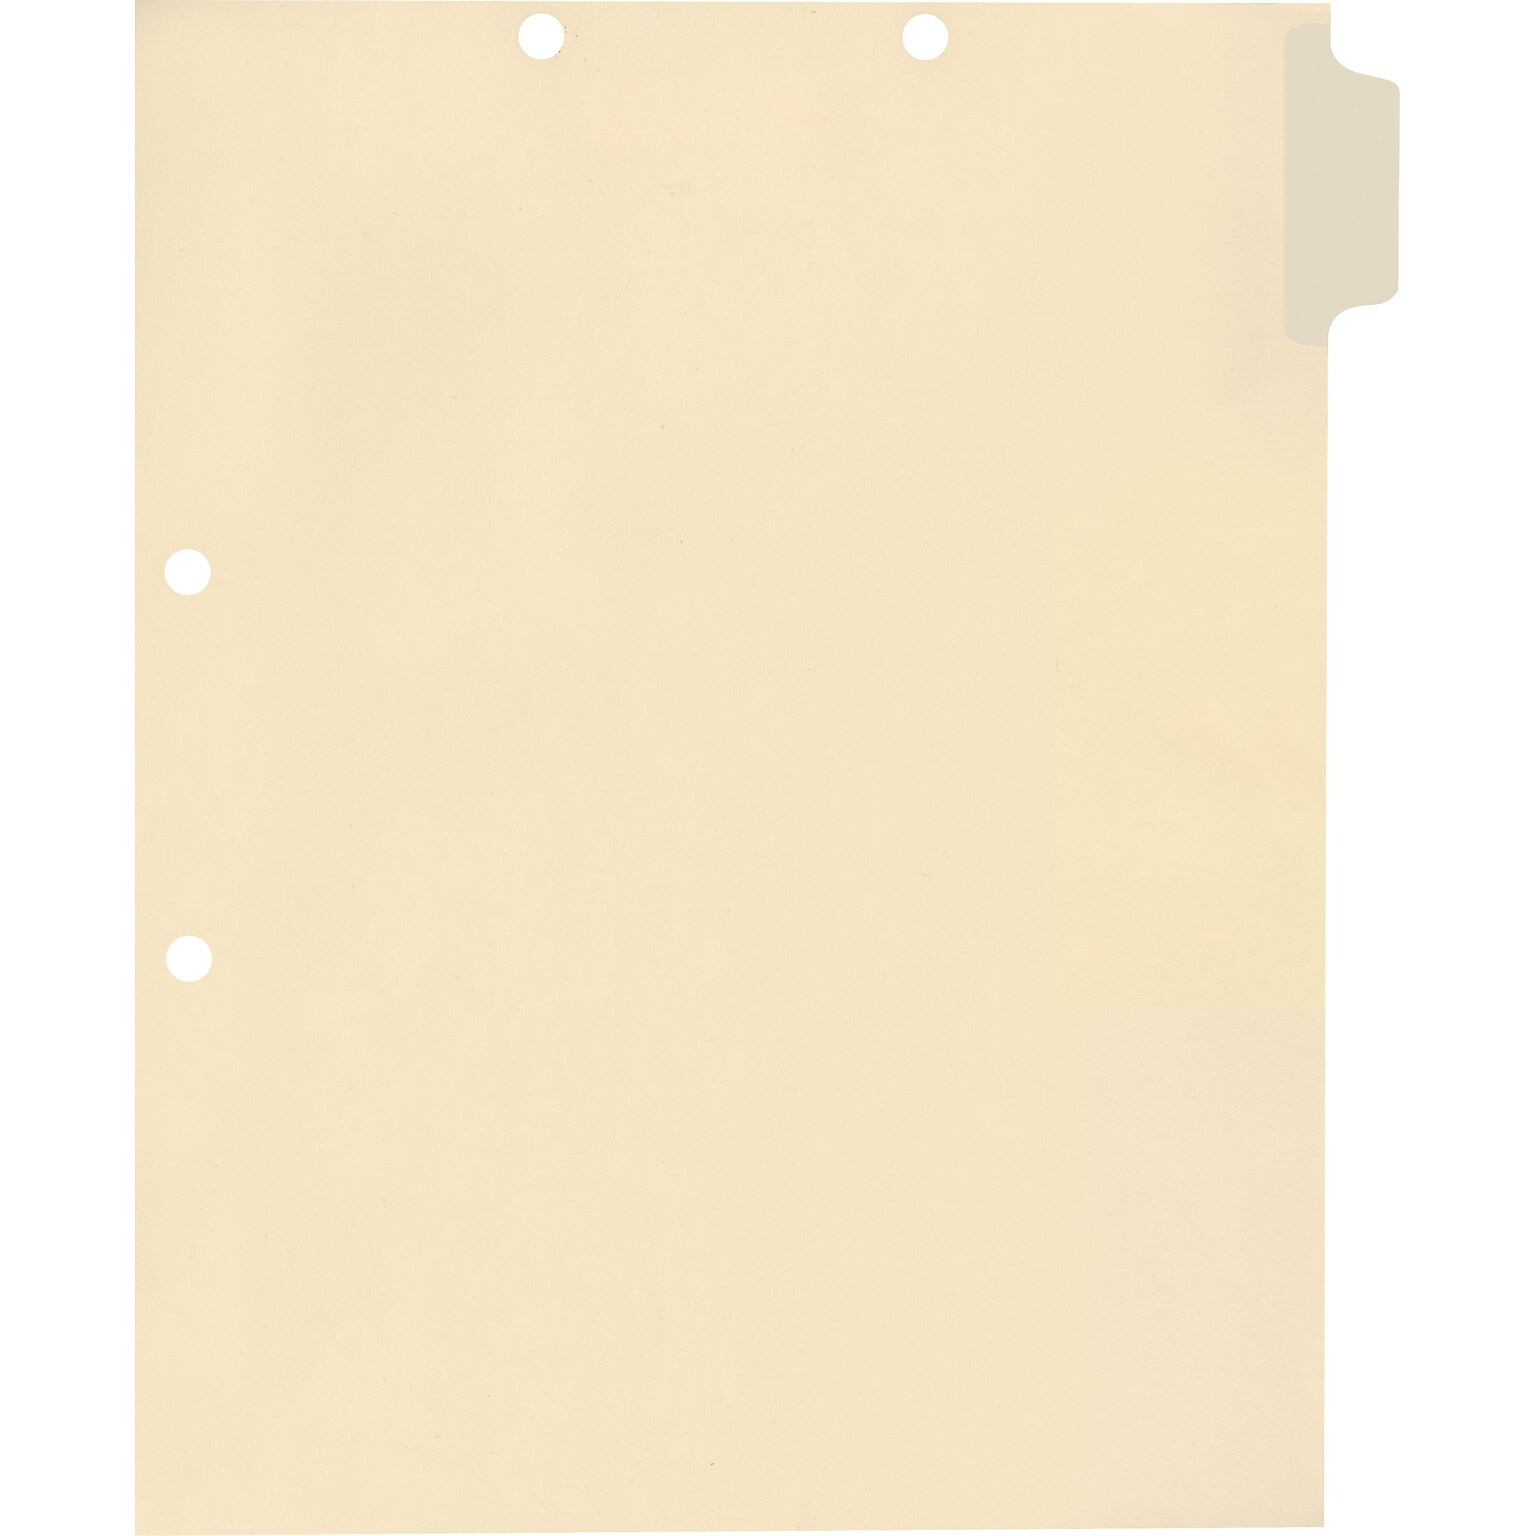 Medical Arts Press® Write-On Side-Tab Chart Dividers, Position 1